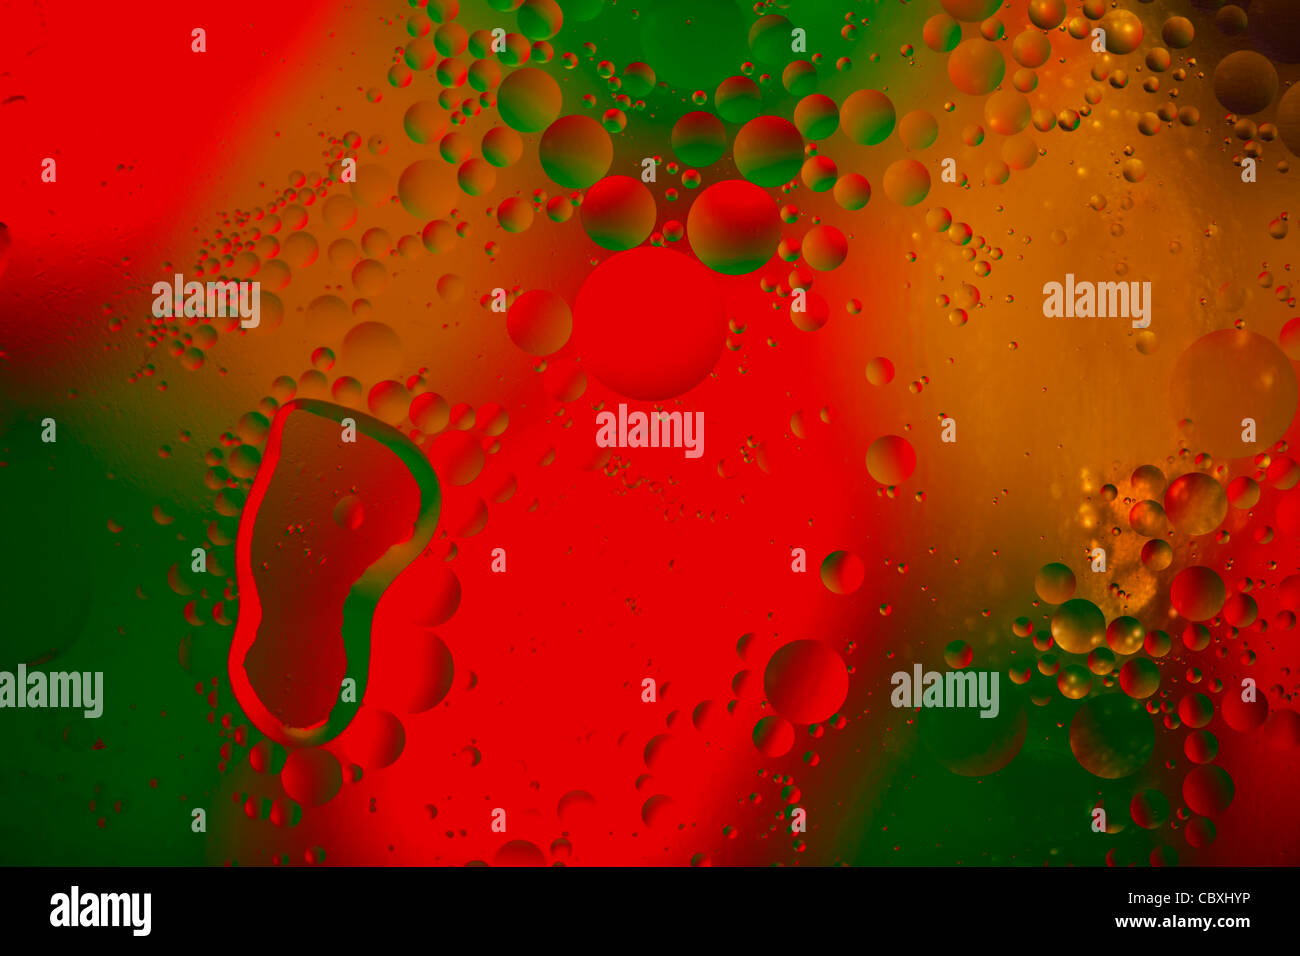 Oil and water with red, green and yellow background. Stock Photo